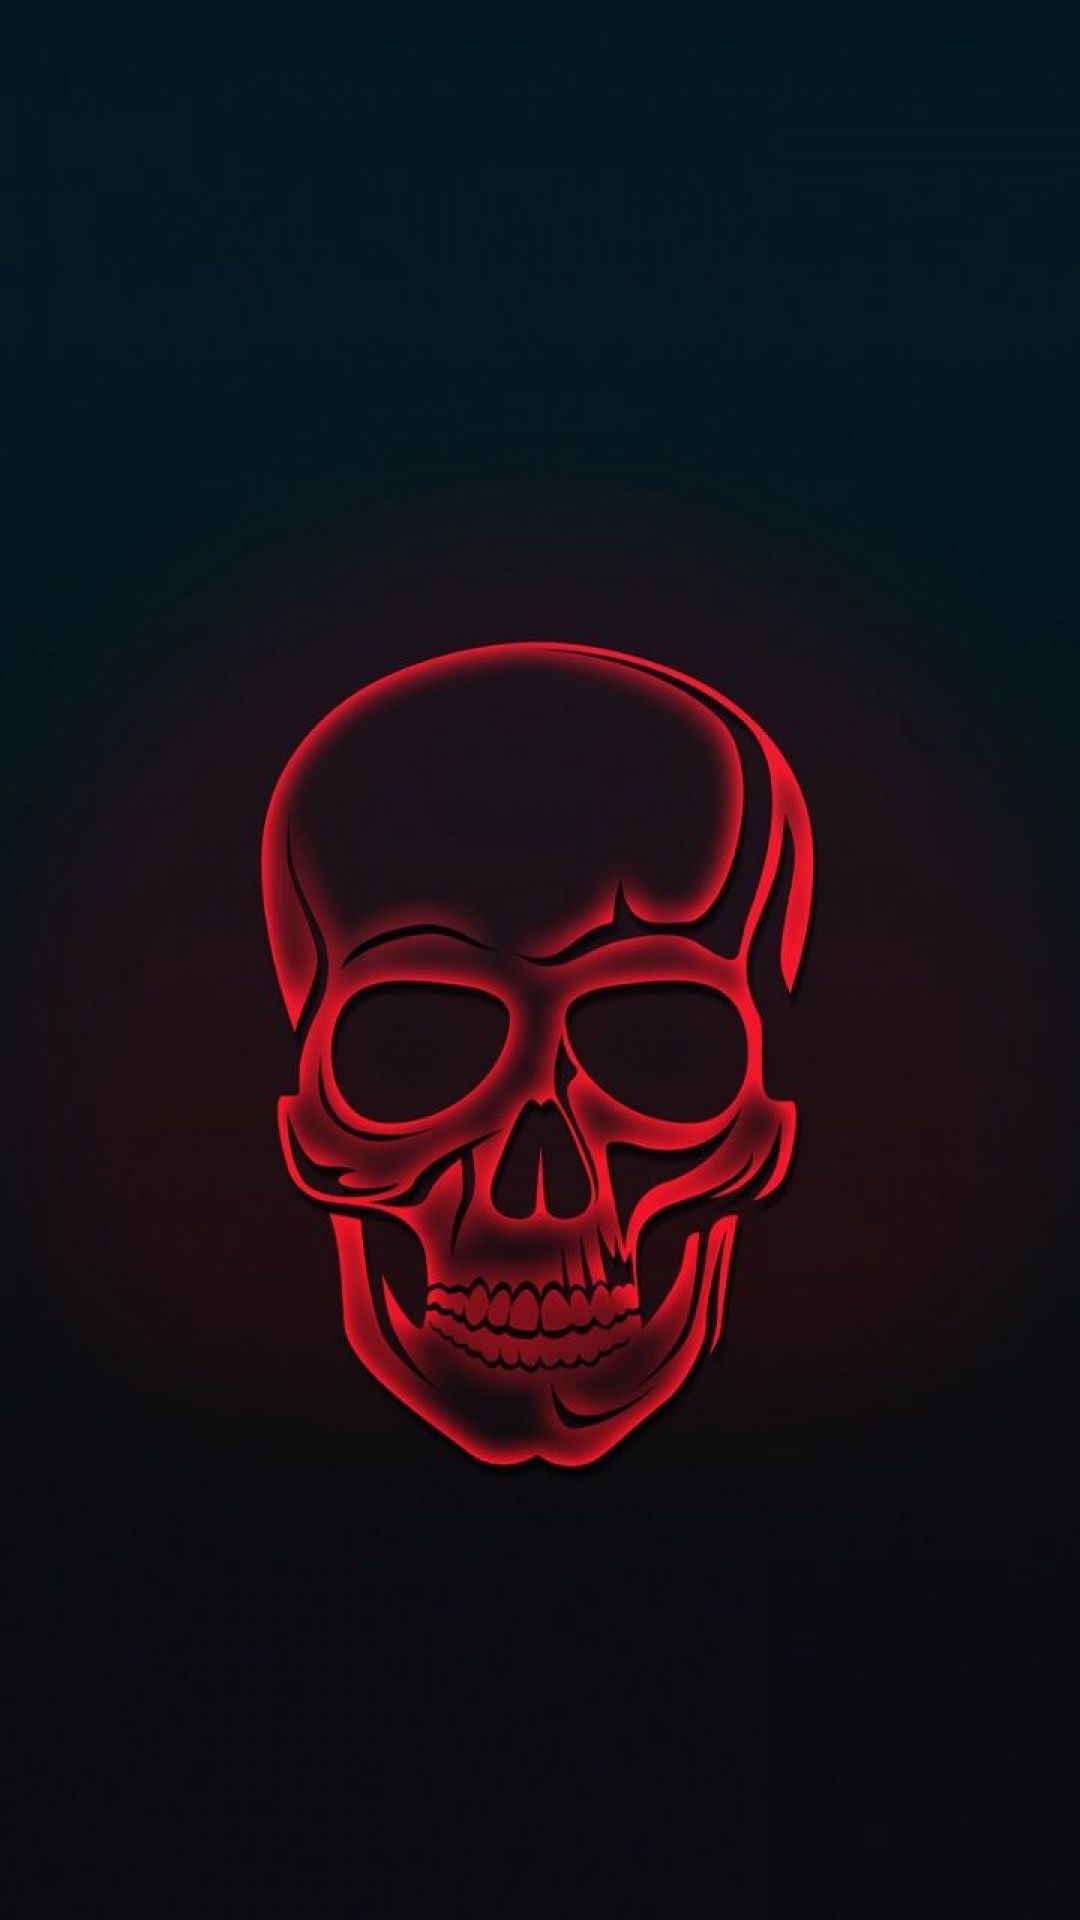 ✓[95+] Neon Skull Wallpaper - Group Wallpaper - Android / iPhone HD  Wallpaper Background Download (png / jpg) (2023)